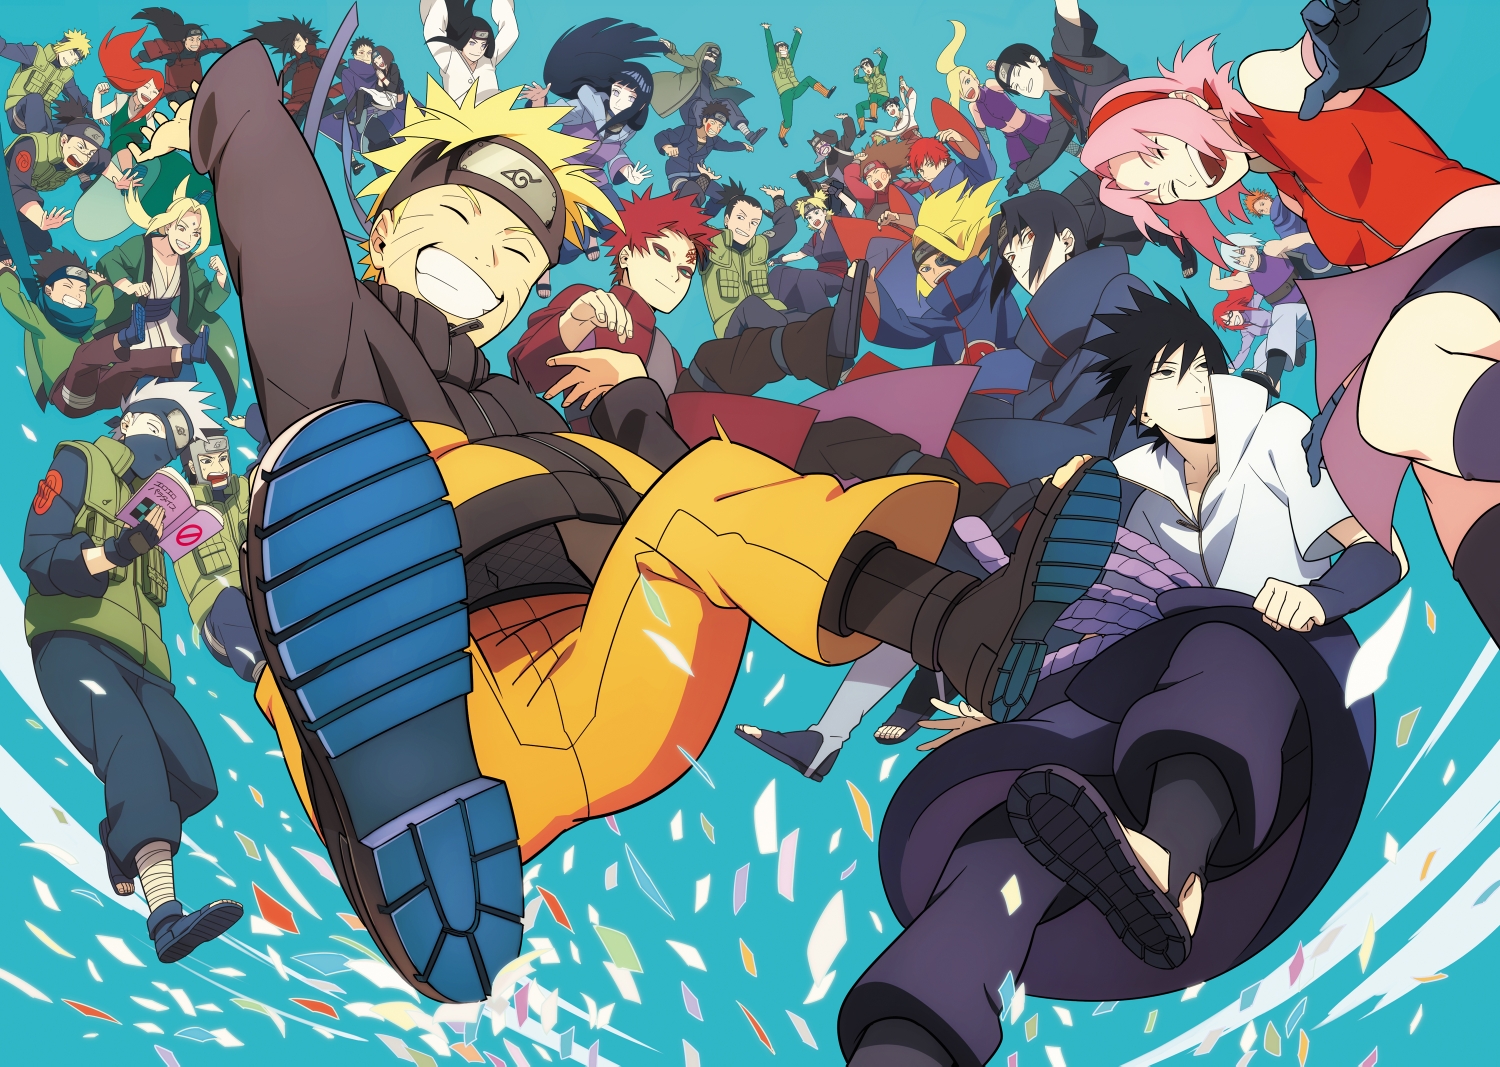 How and Where To Watch Naruto Shippuden Dubbed